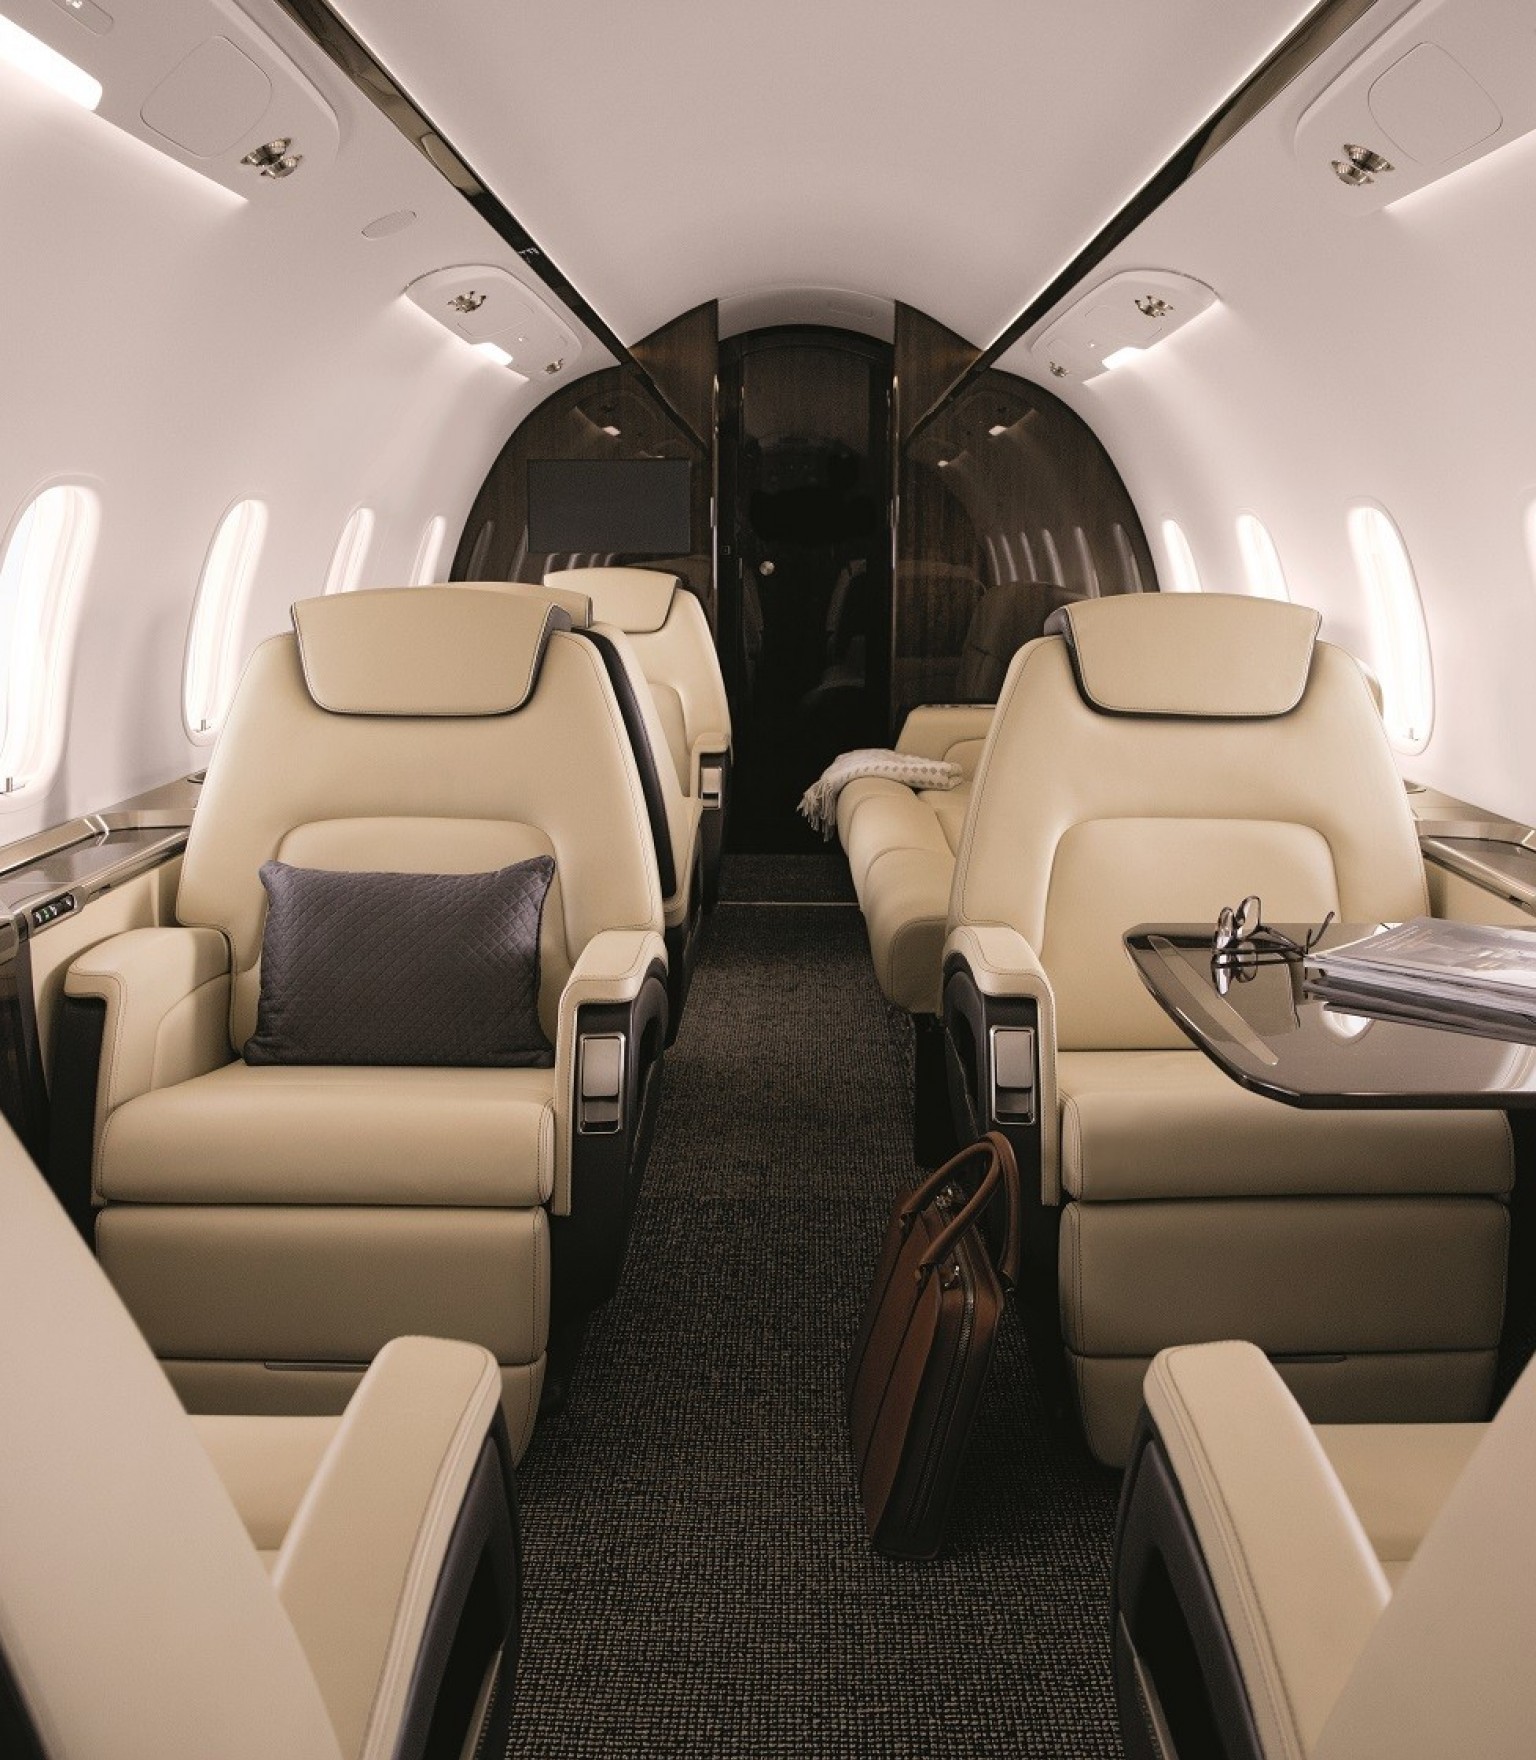 The Challenger 350 cabin